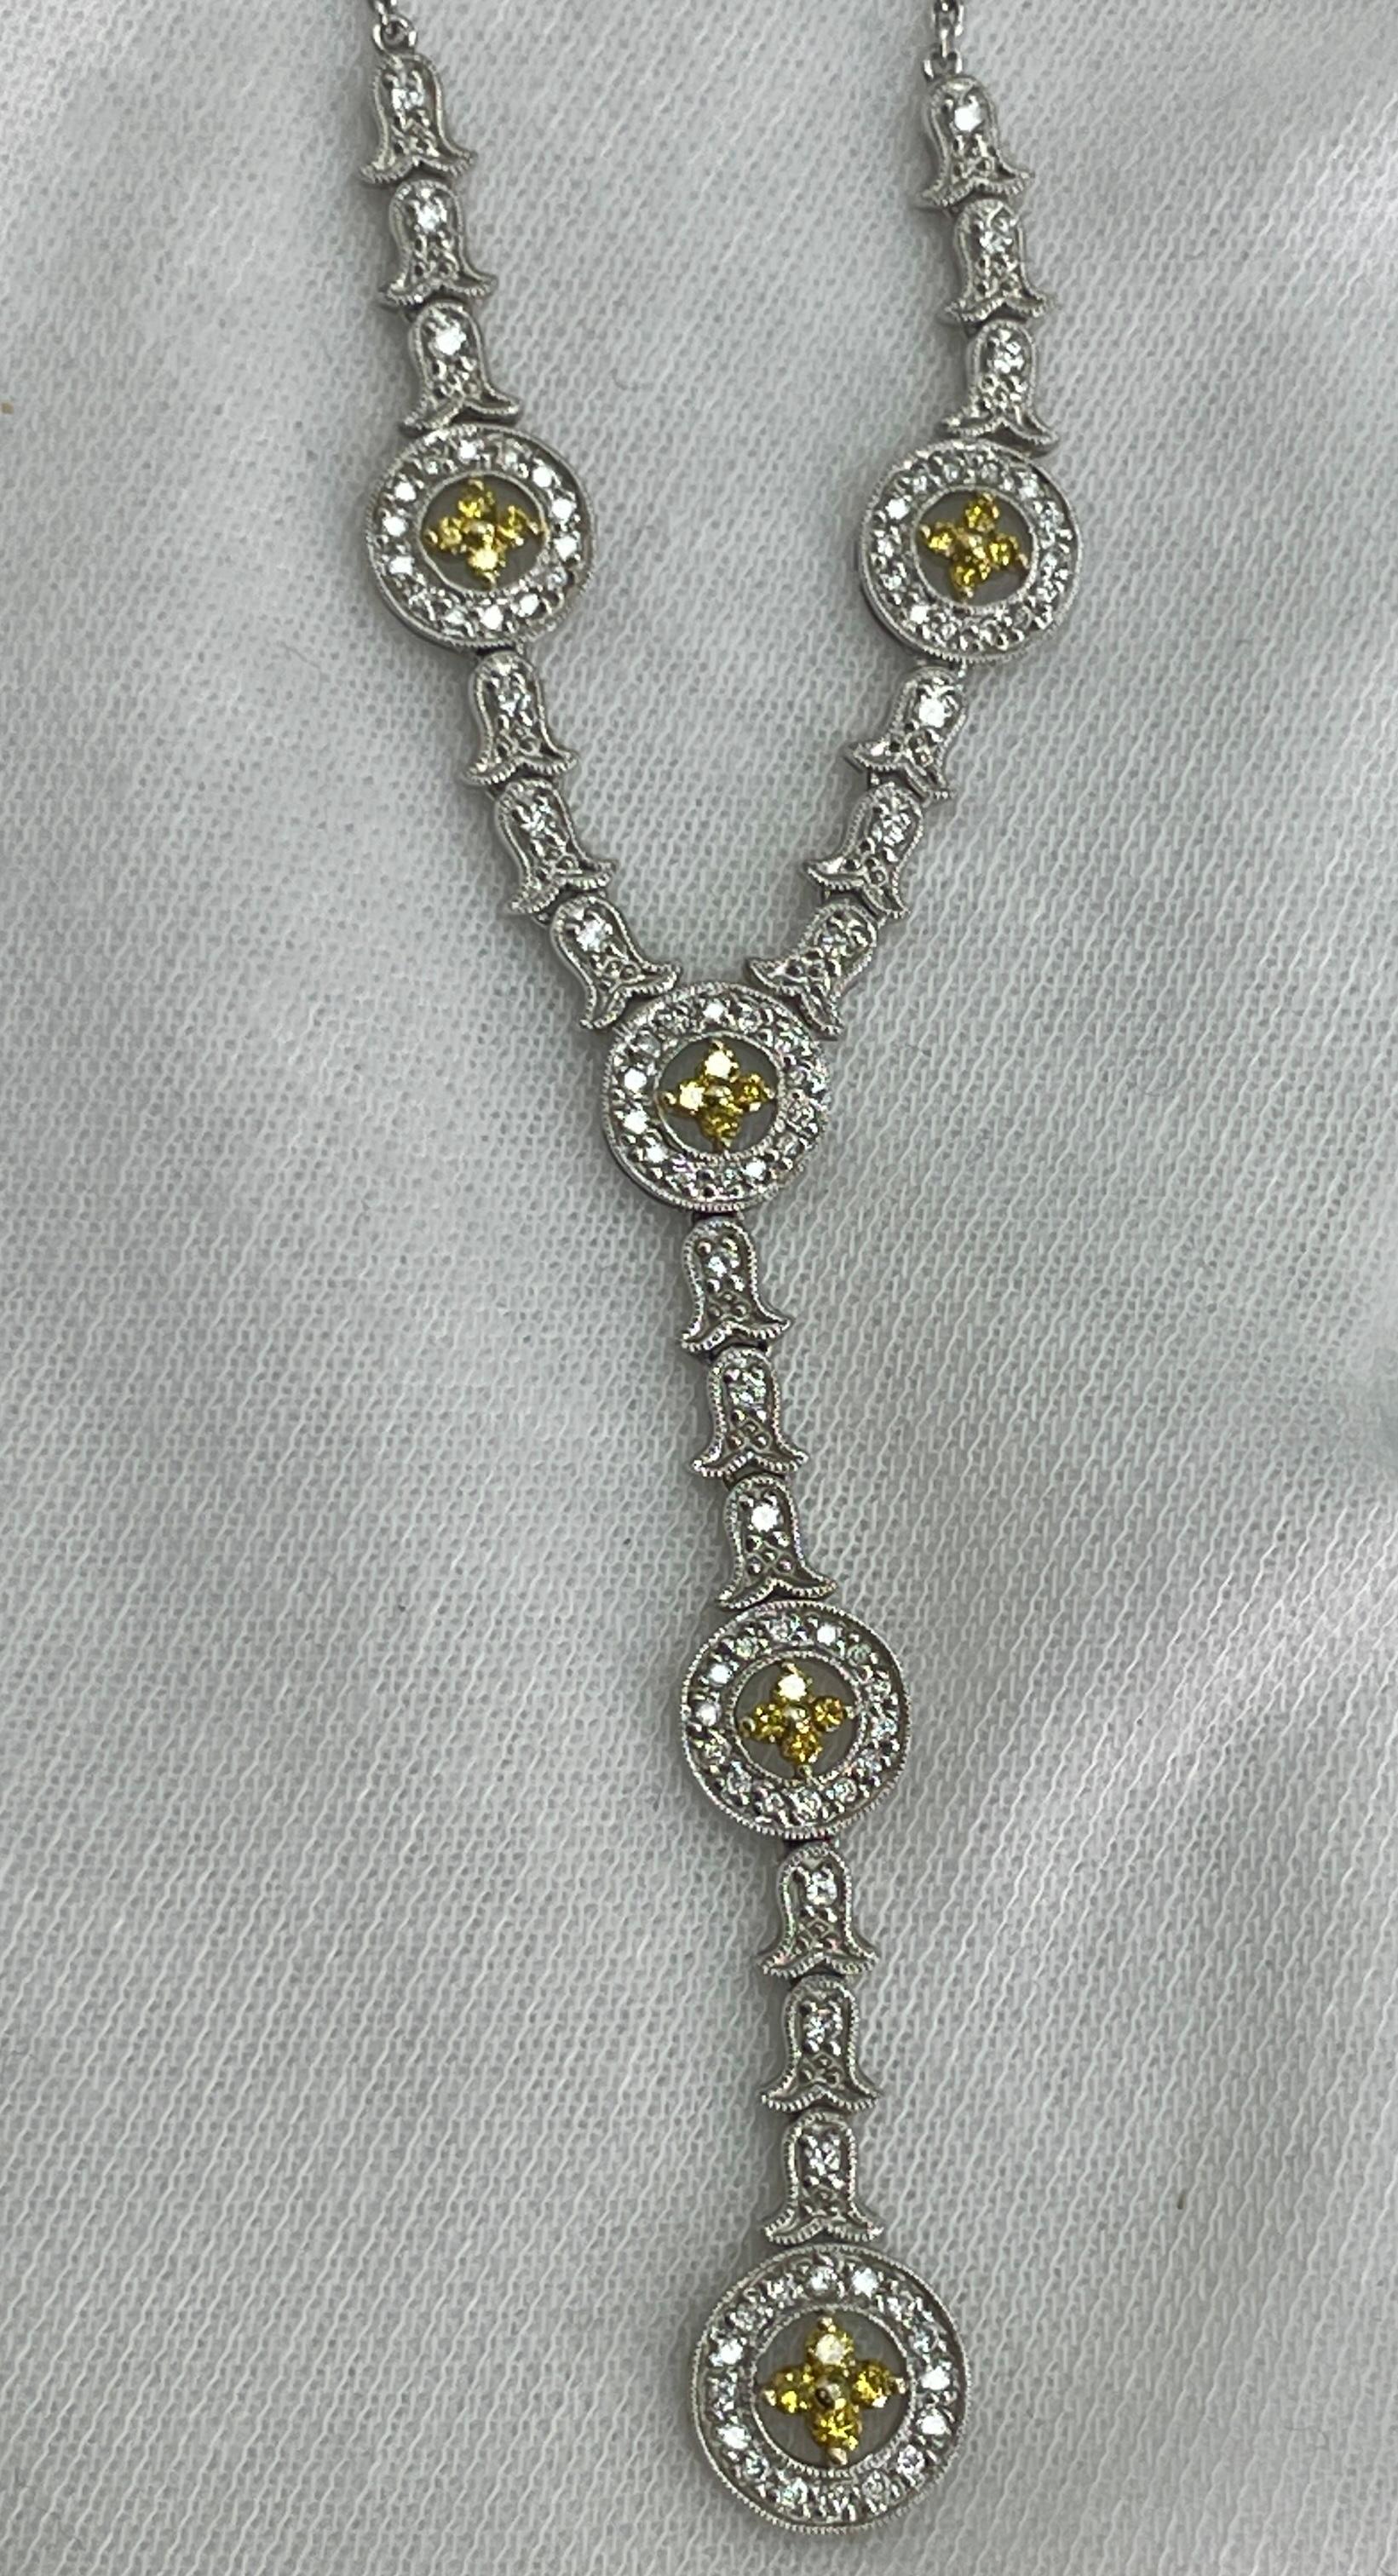 Y-necklace with 0.48Ct of white diamonds and 0.25Ct of brilliant yellow (canary) diamonds in 18K white gold